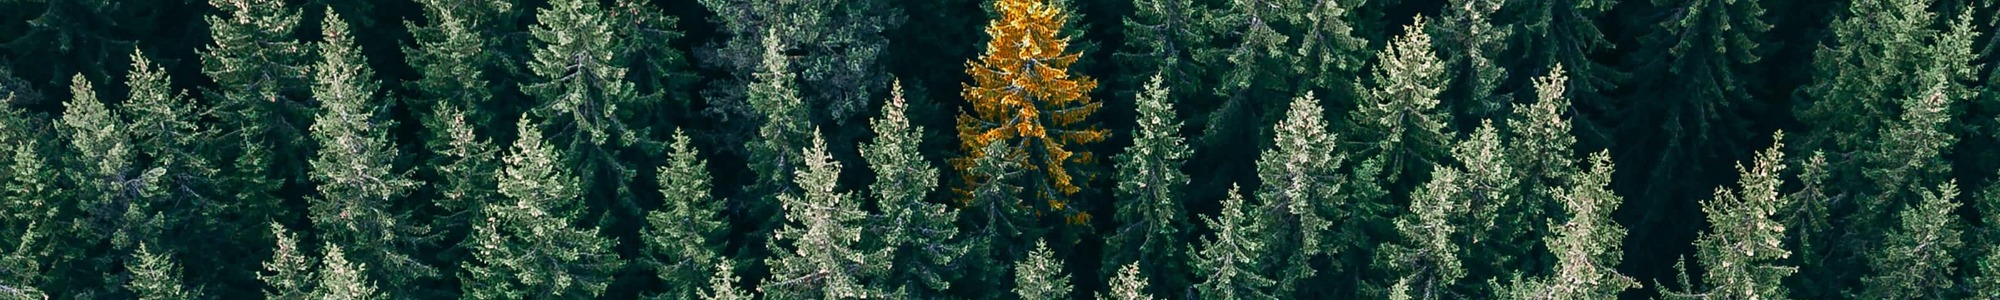 Golden tree stands out in middle of the forest